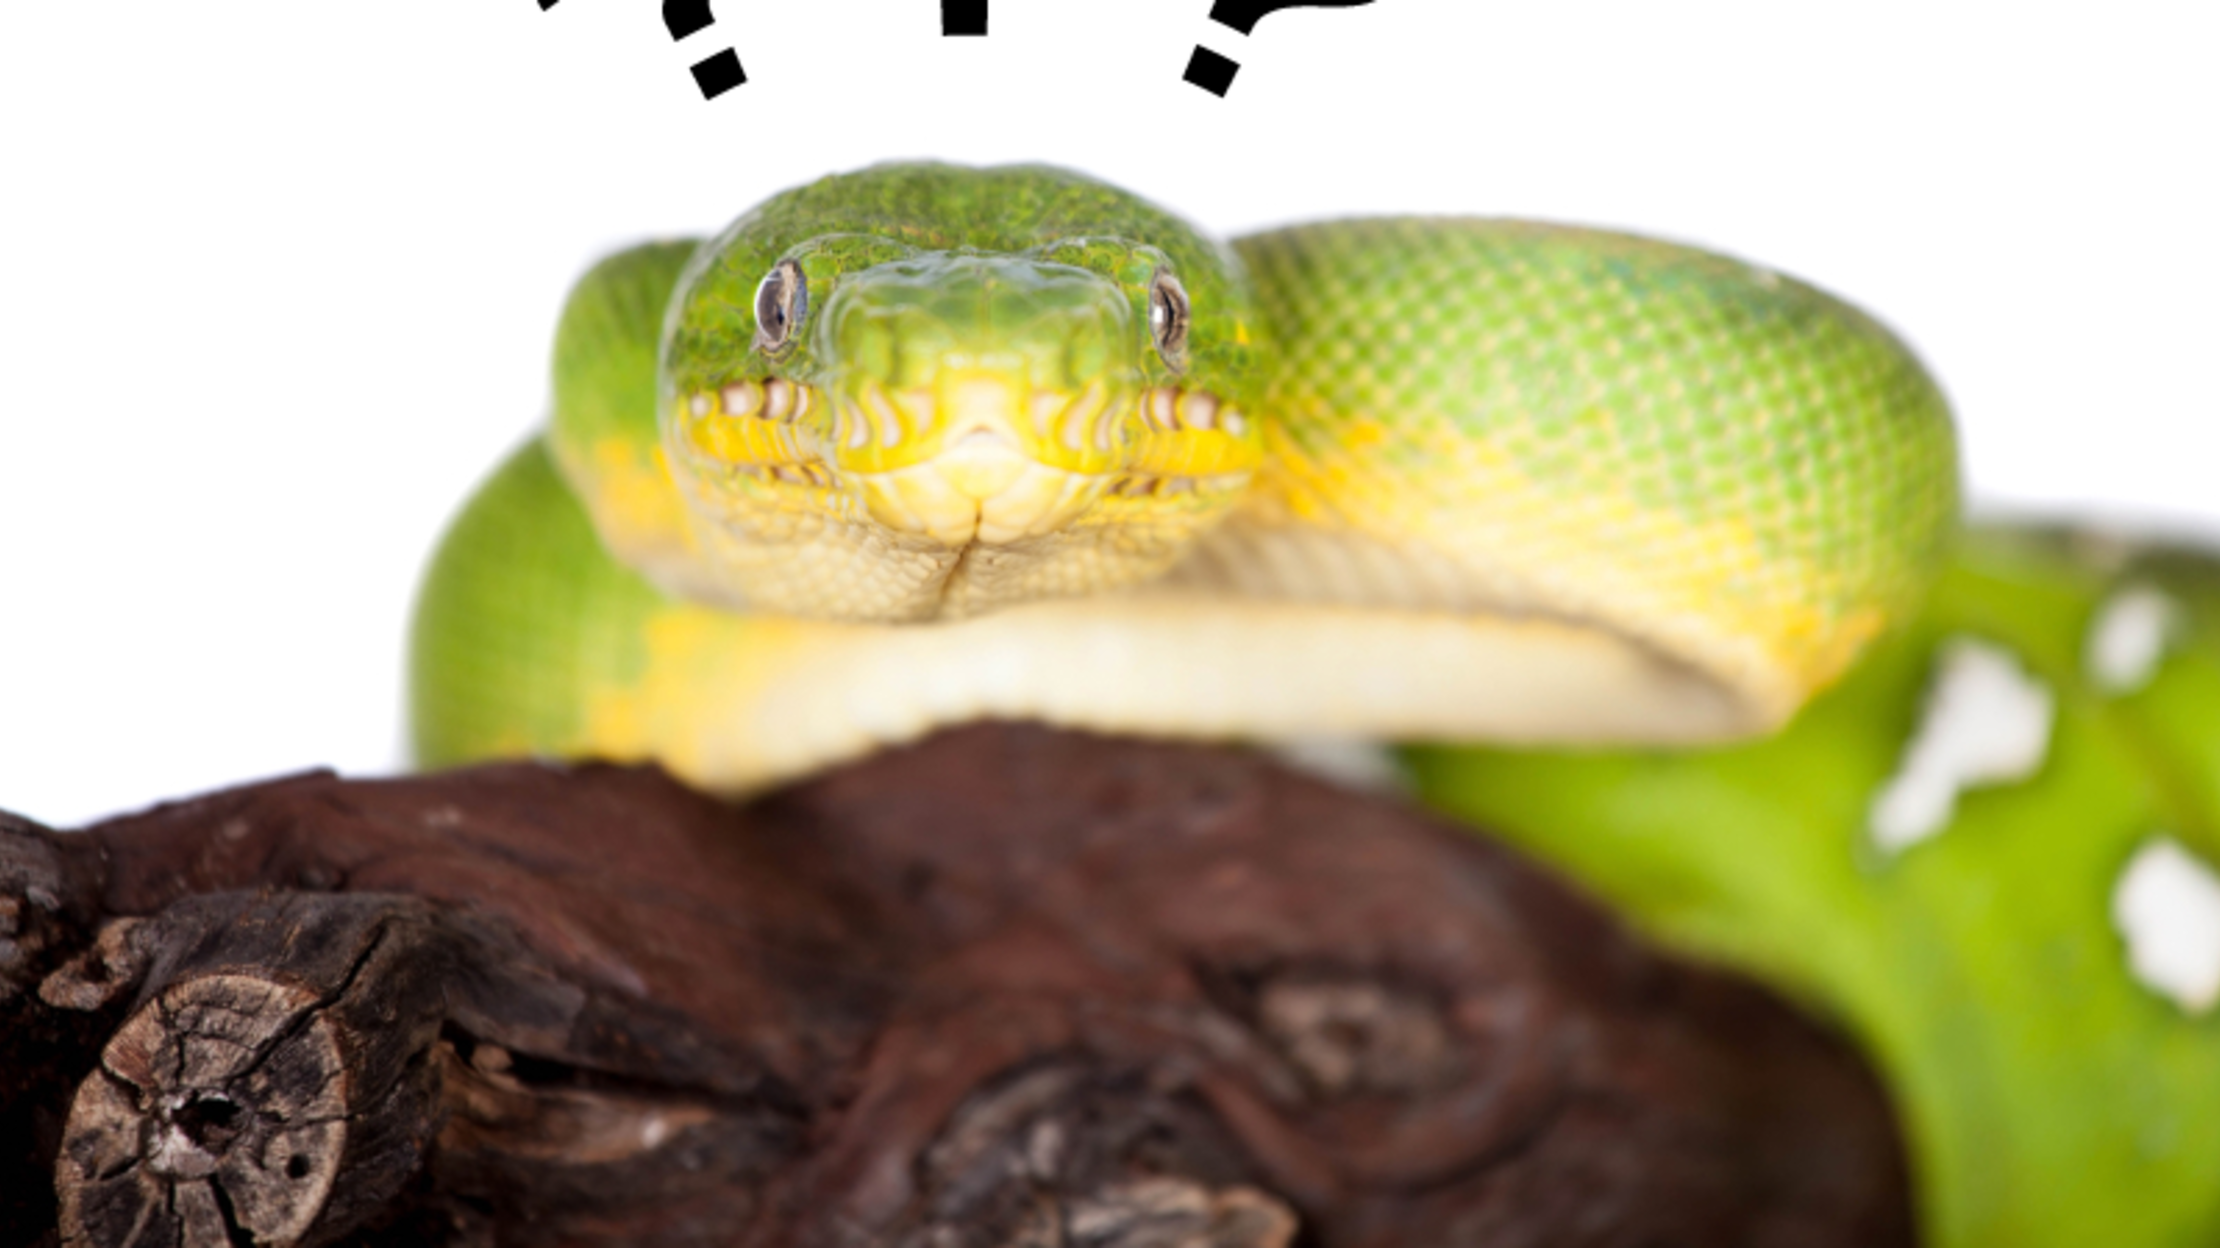 Whats The Difference Between A Boa And A Python Mental Floss 